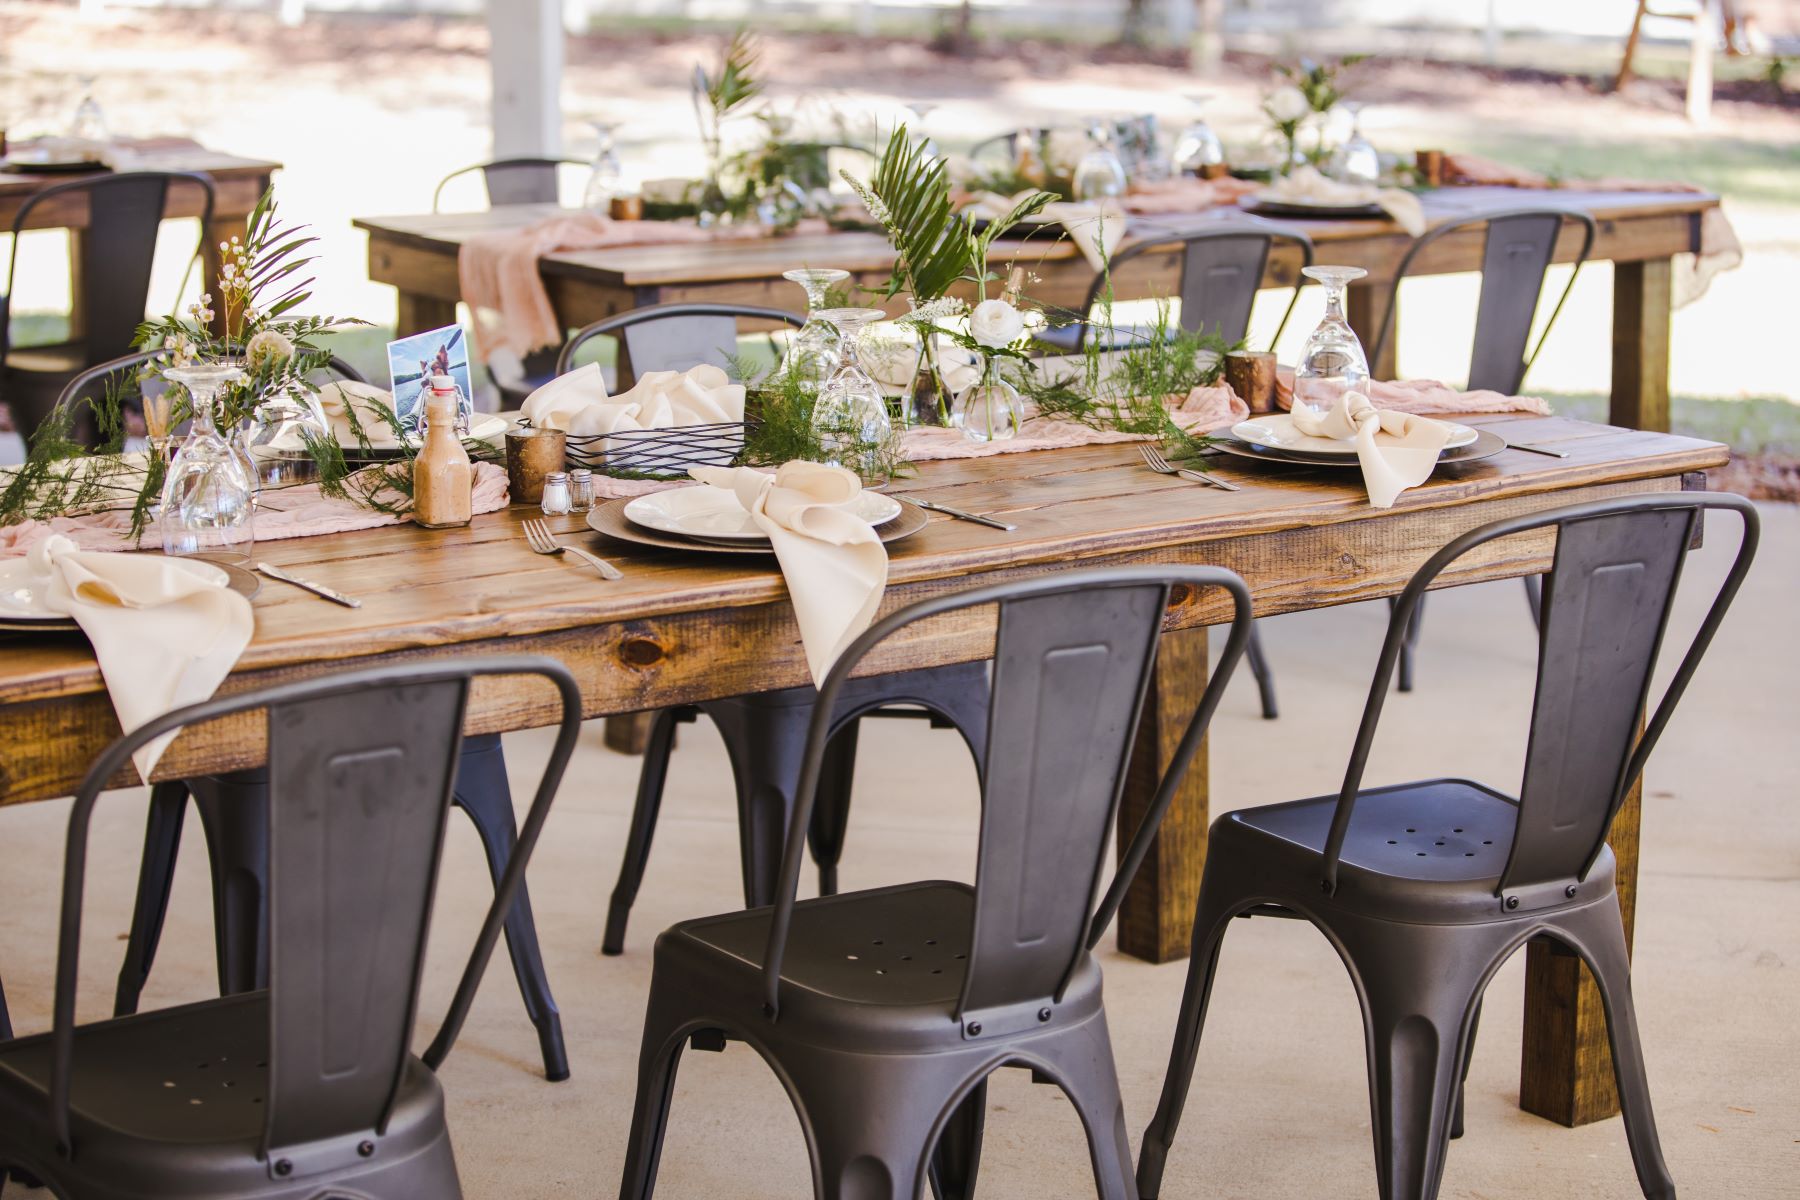 Set, empty table outdoors for a wedding